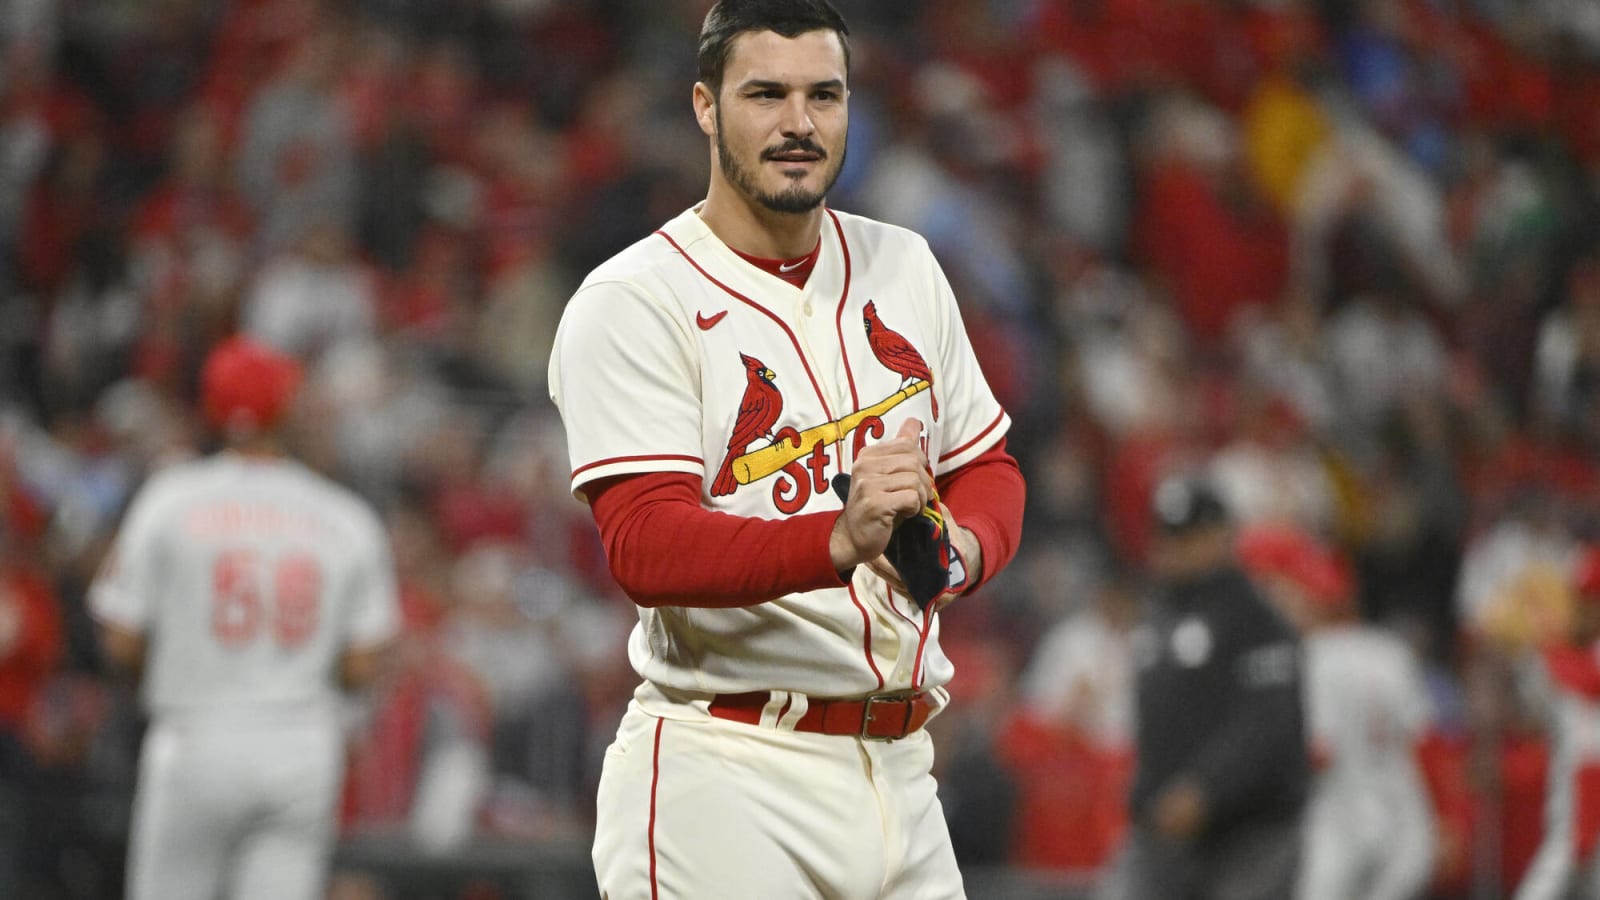 Cardinals Fan Offers Up Thought-Provoking Nolan Arenado Take